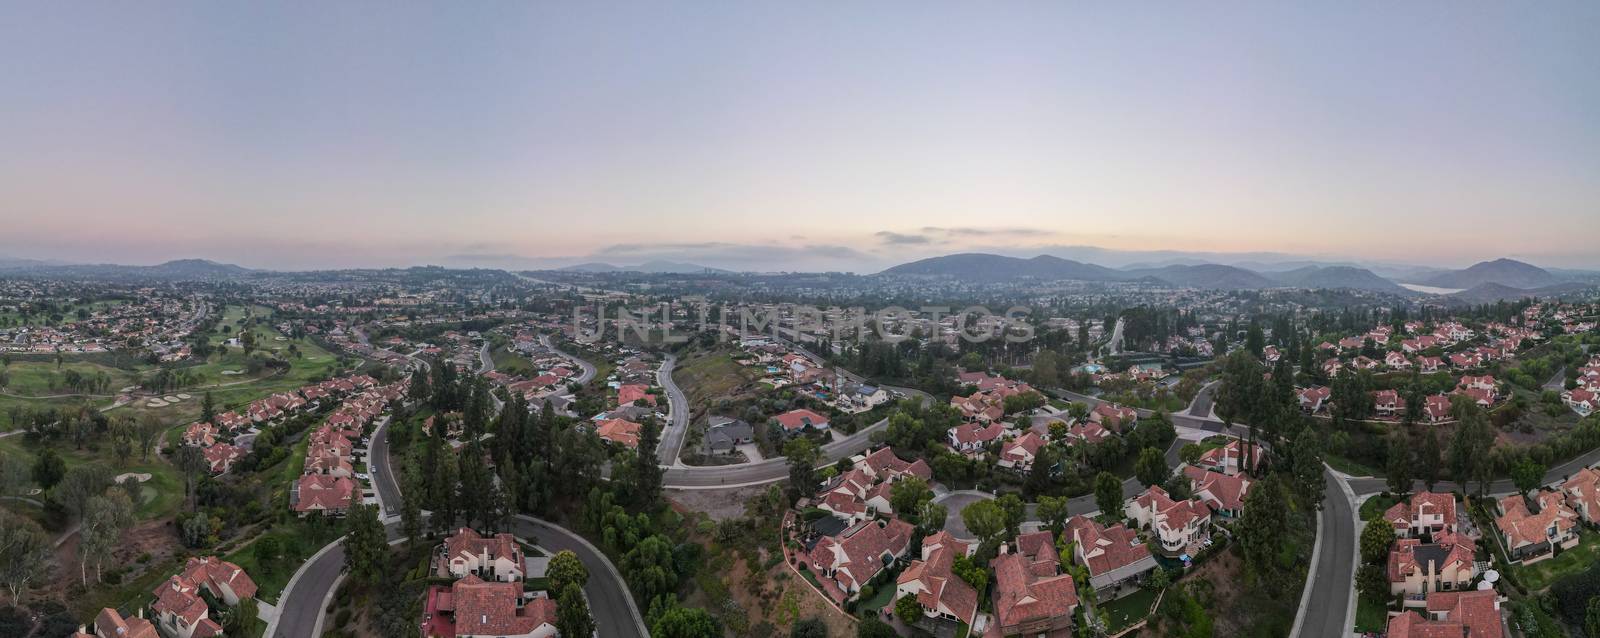 Aerial panoramic view of middle class neighborhood with residential house community in Rancho Bernardo during sunset, South California, USA.